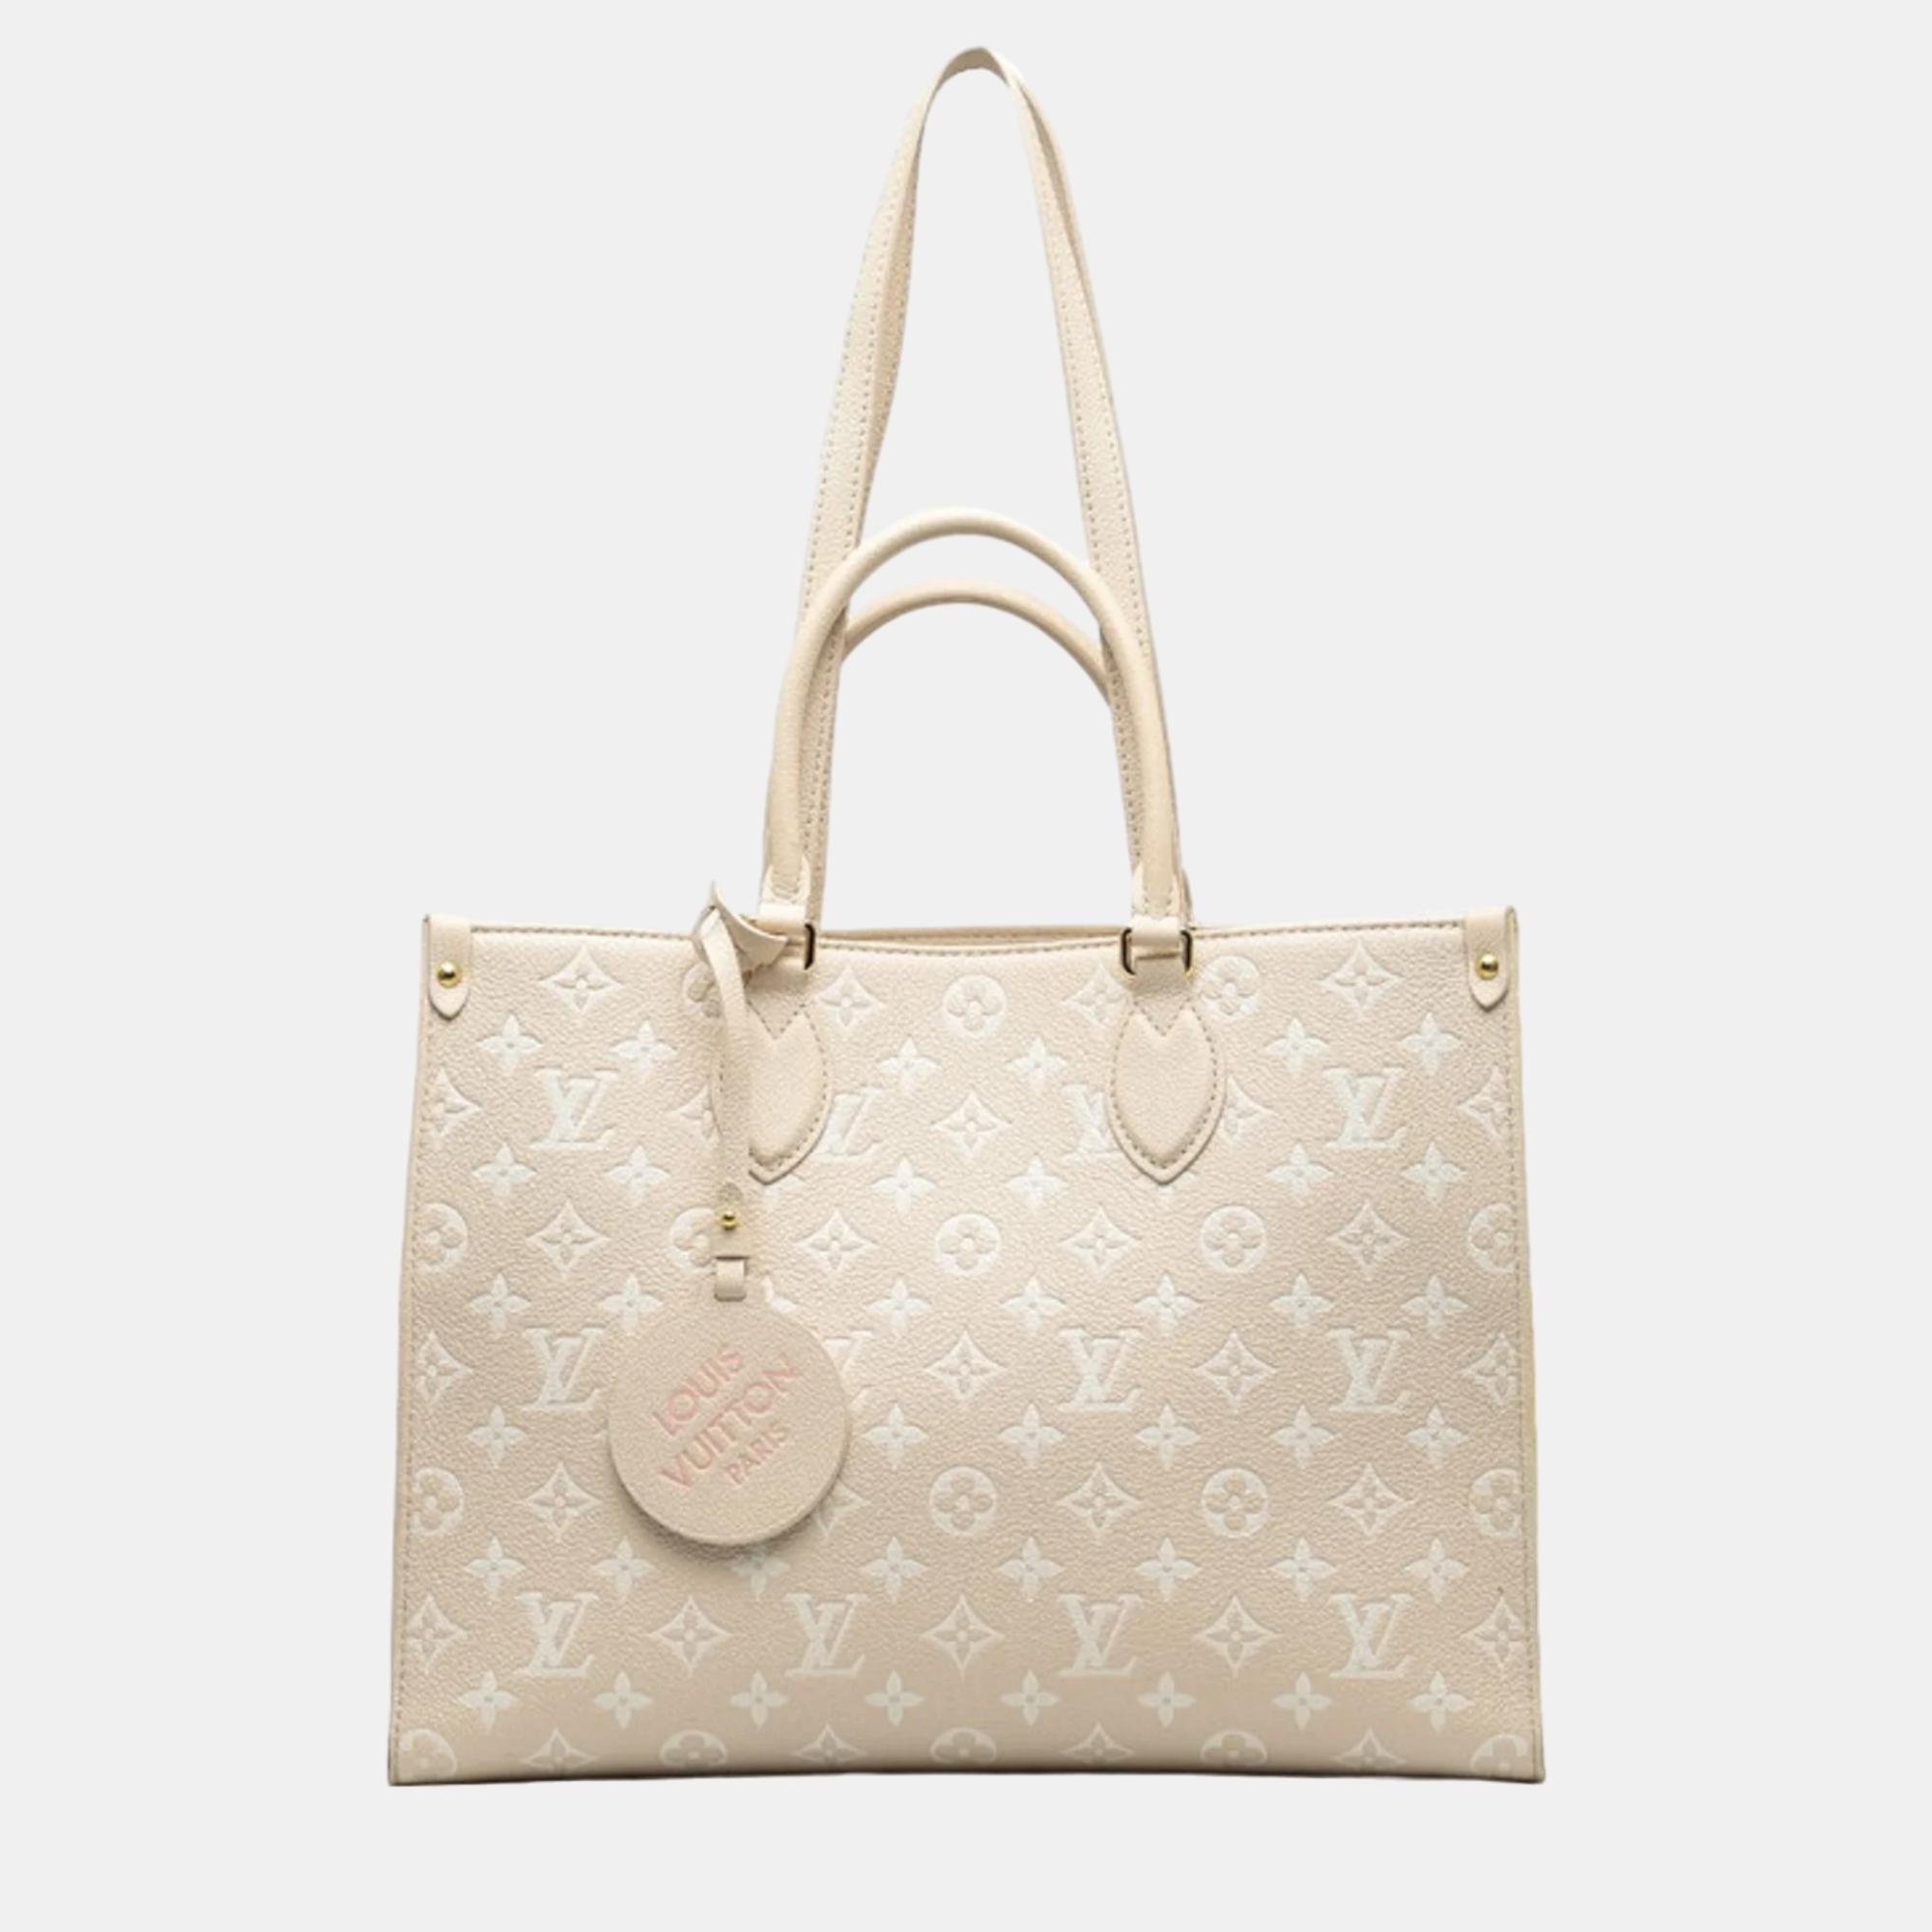 Louis vuitton rose beige yellow monogram empreinte leather spring in the city onthego mm tote bag